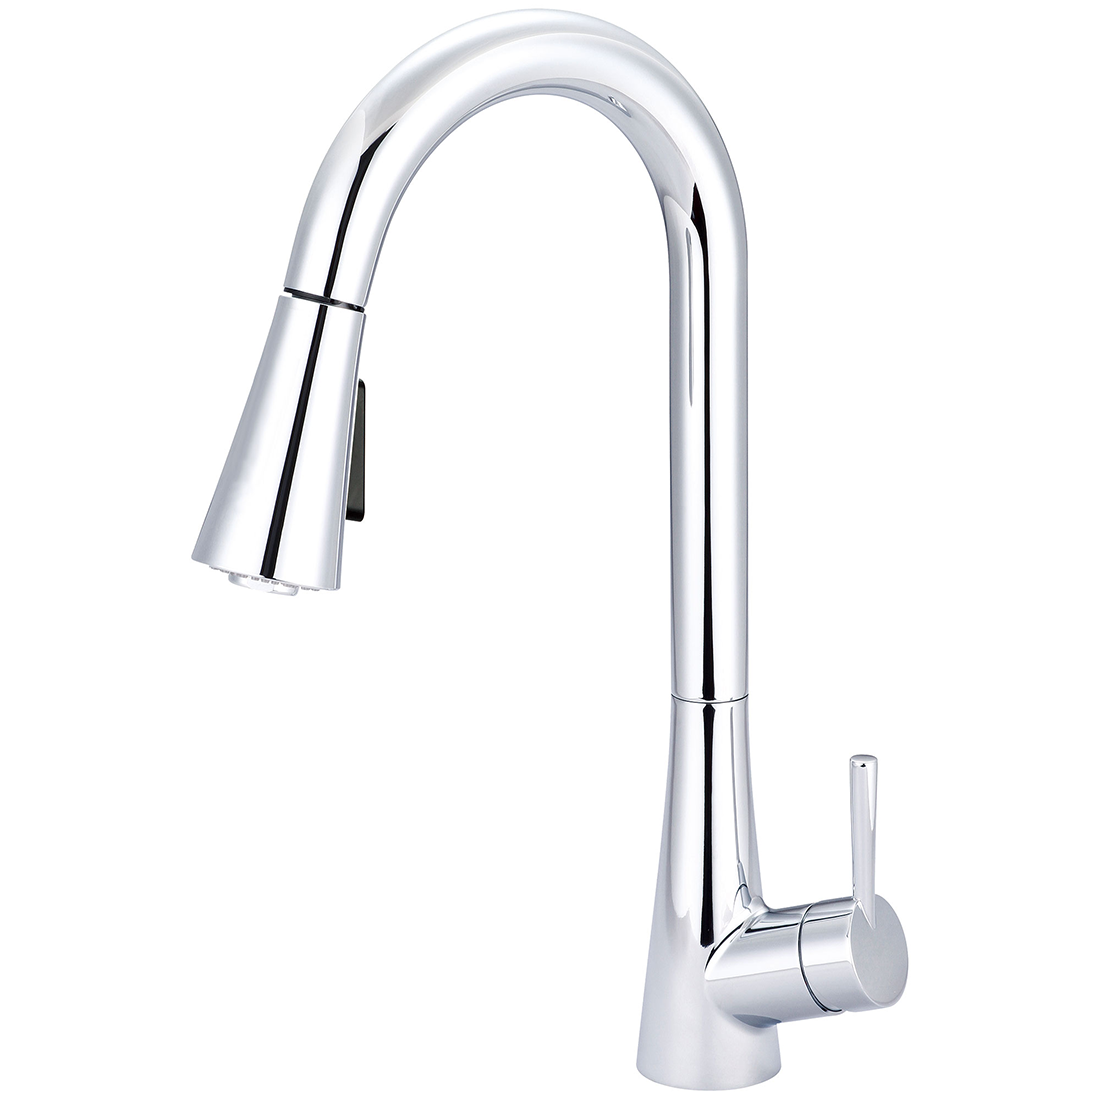 i2 Single Handle Pull-Down Kitchen Faucet Model# K-5020